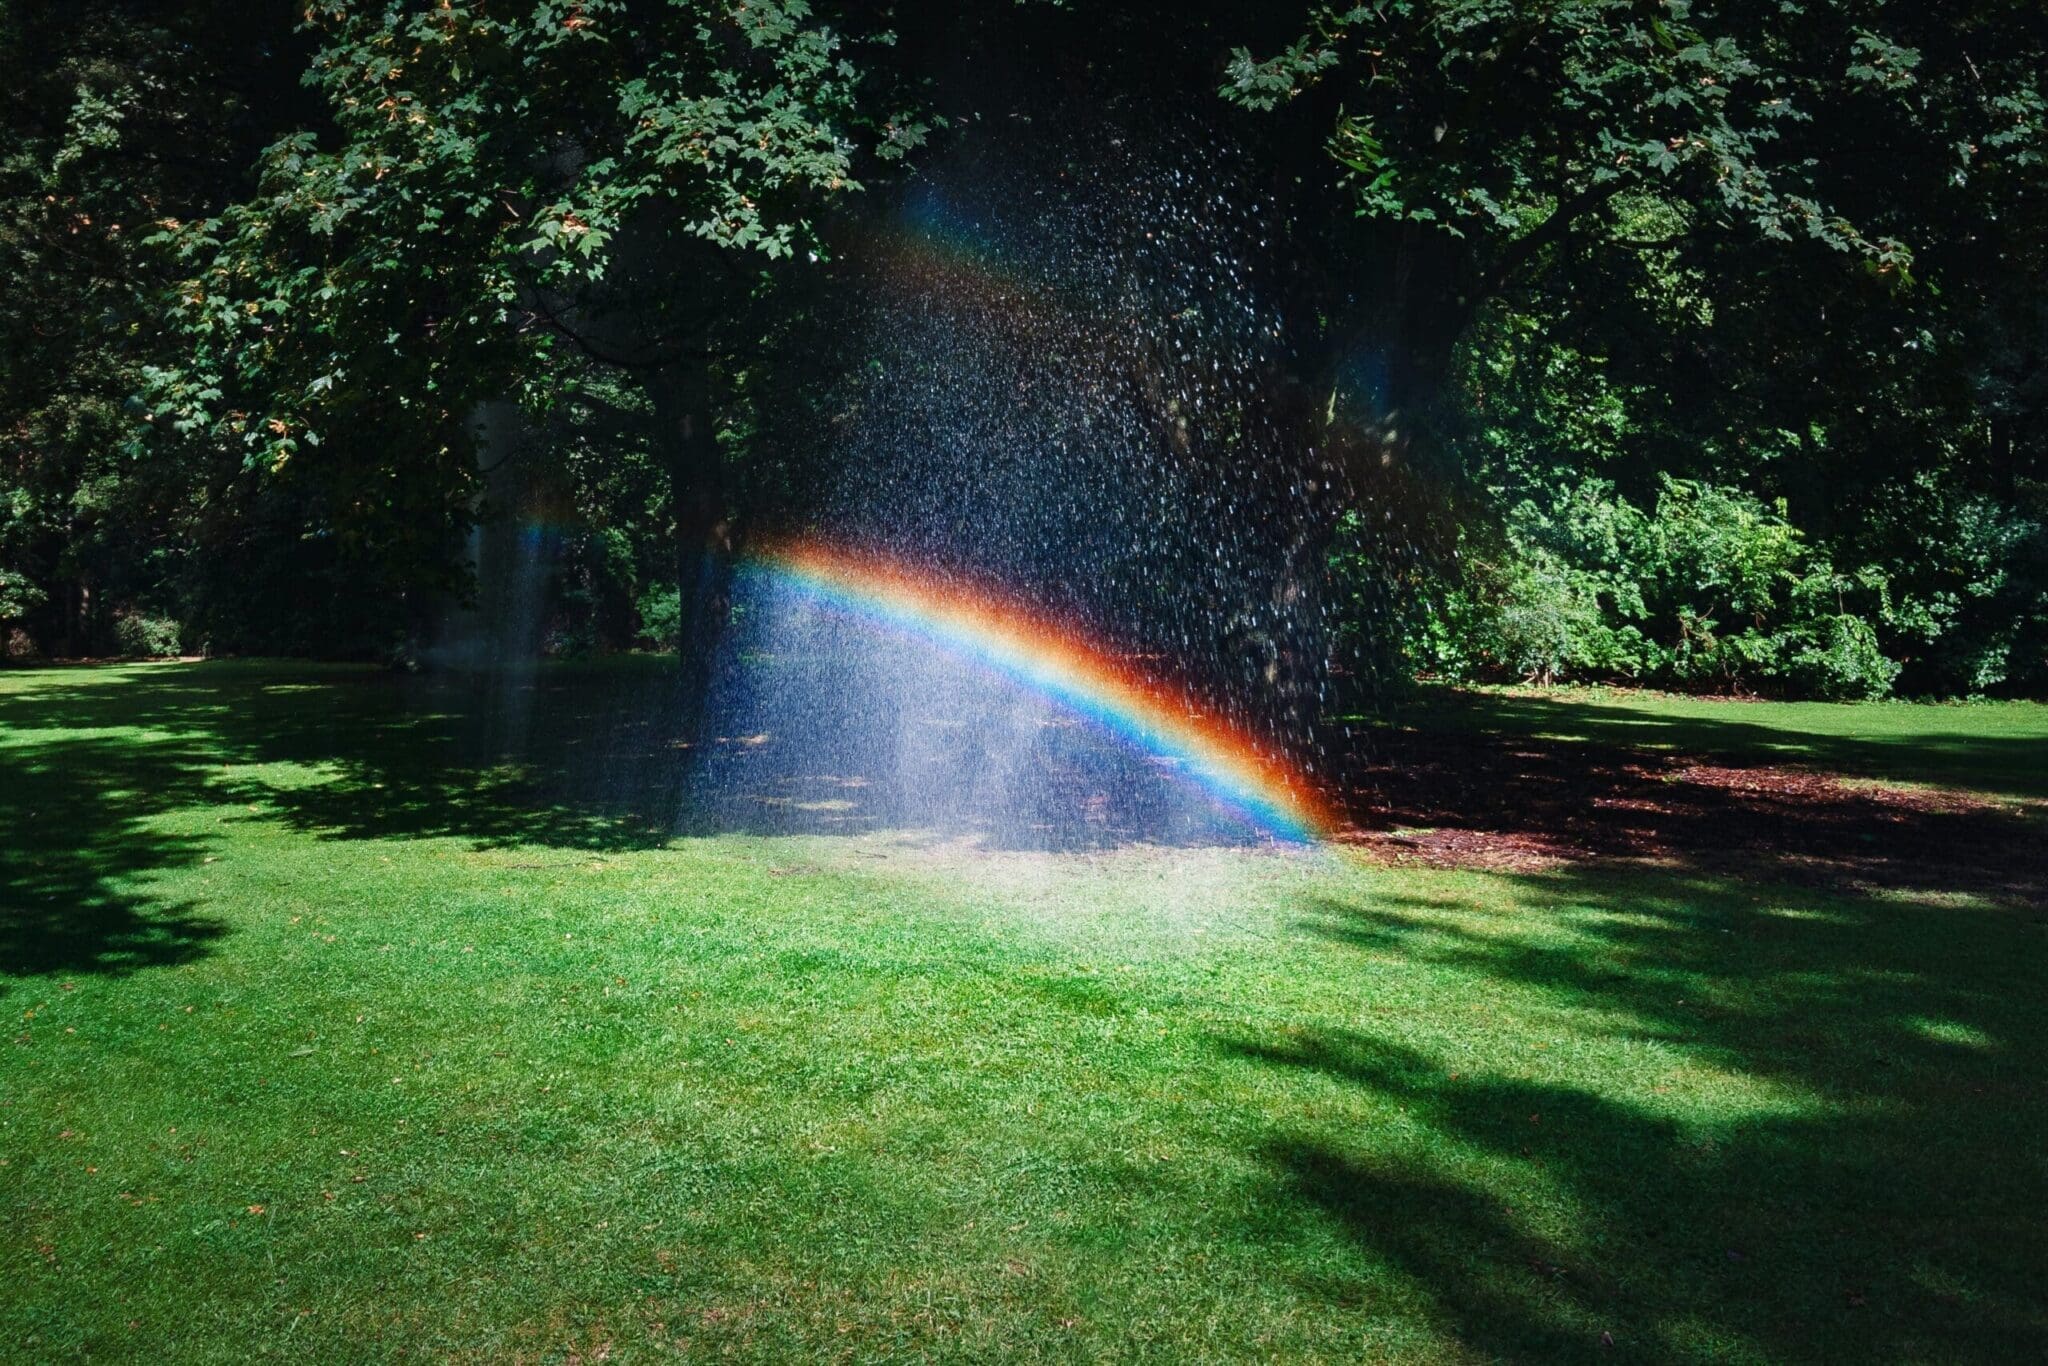 Rainbow created by a sprinkler on a hot day in Berlin